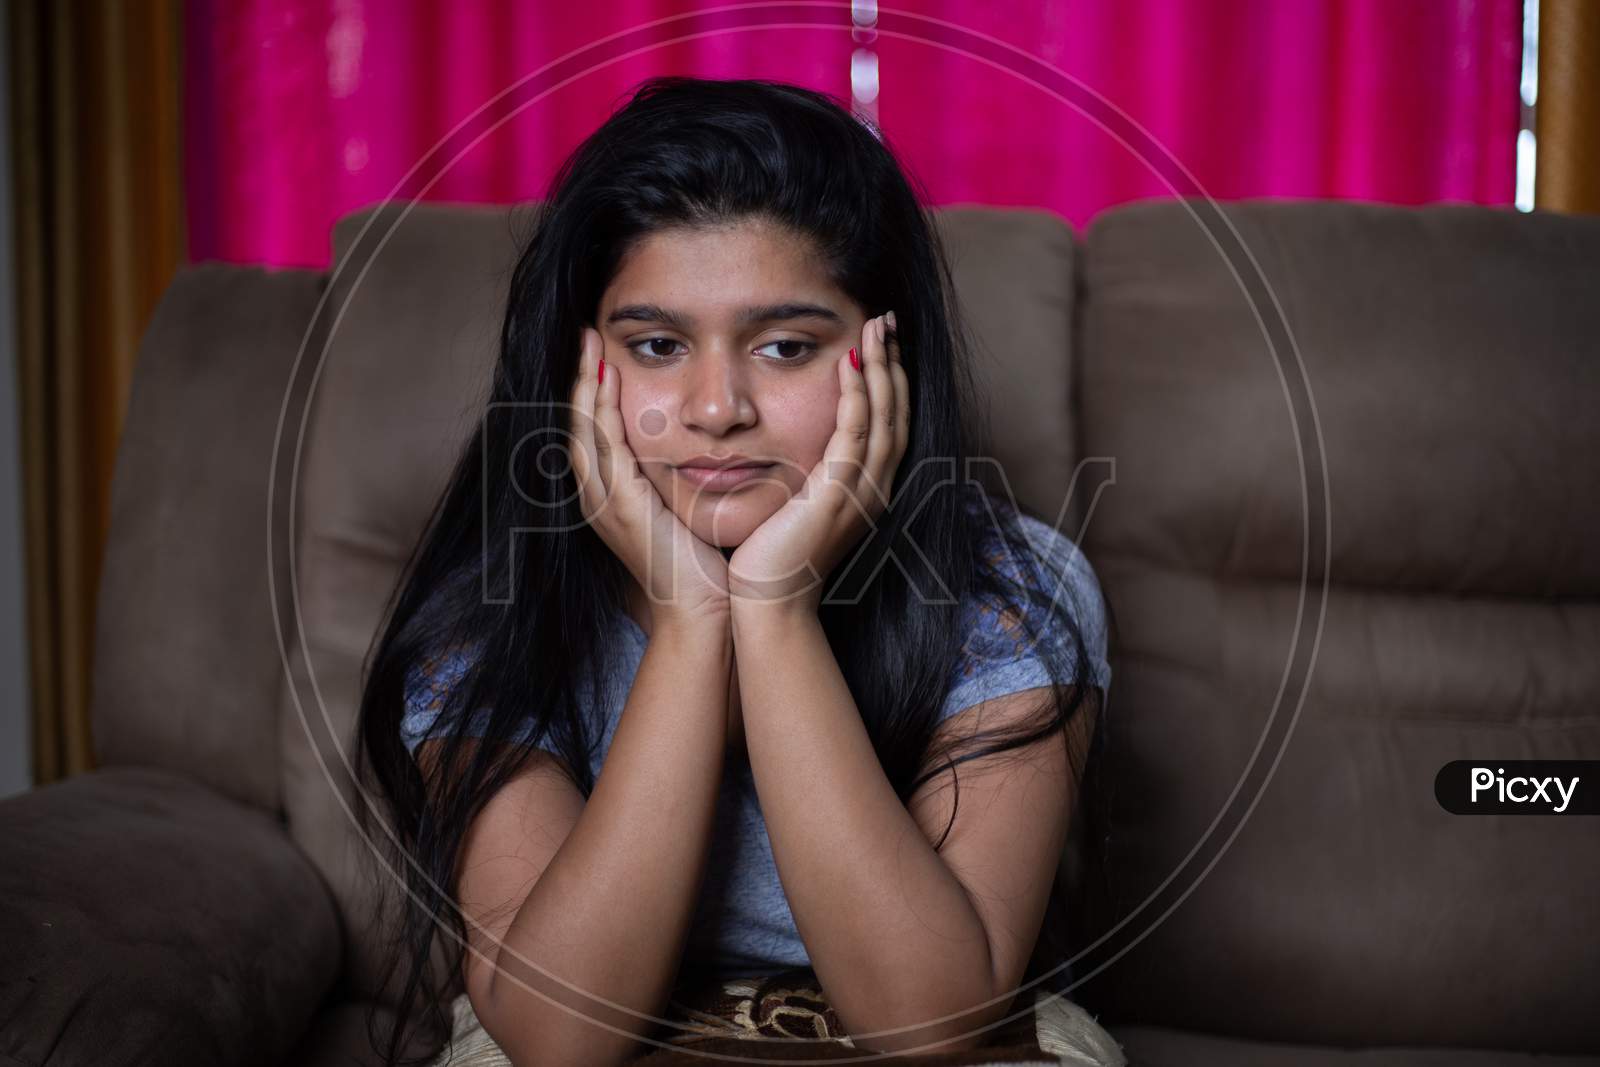 Alone Sad Young Girl Thinking About Problems While Sitting On Sofa - Concept Of Negative Emotions, Mental Health Illness Due To Coronavirus Covid-19 Pandemic.